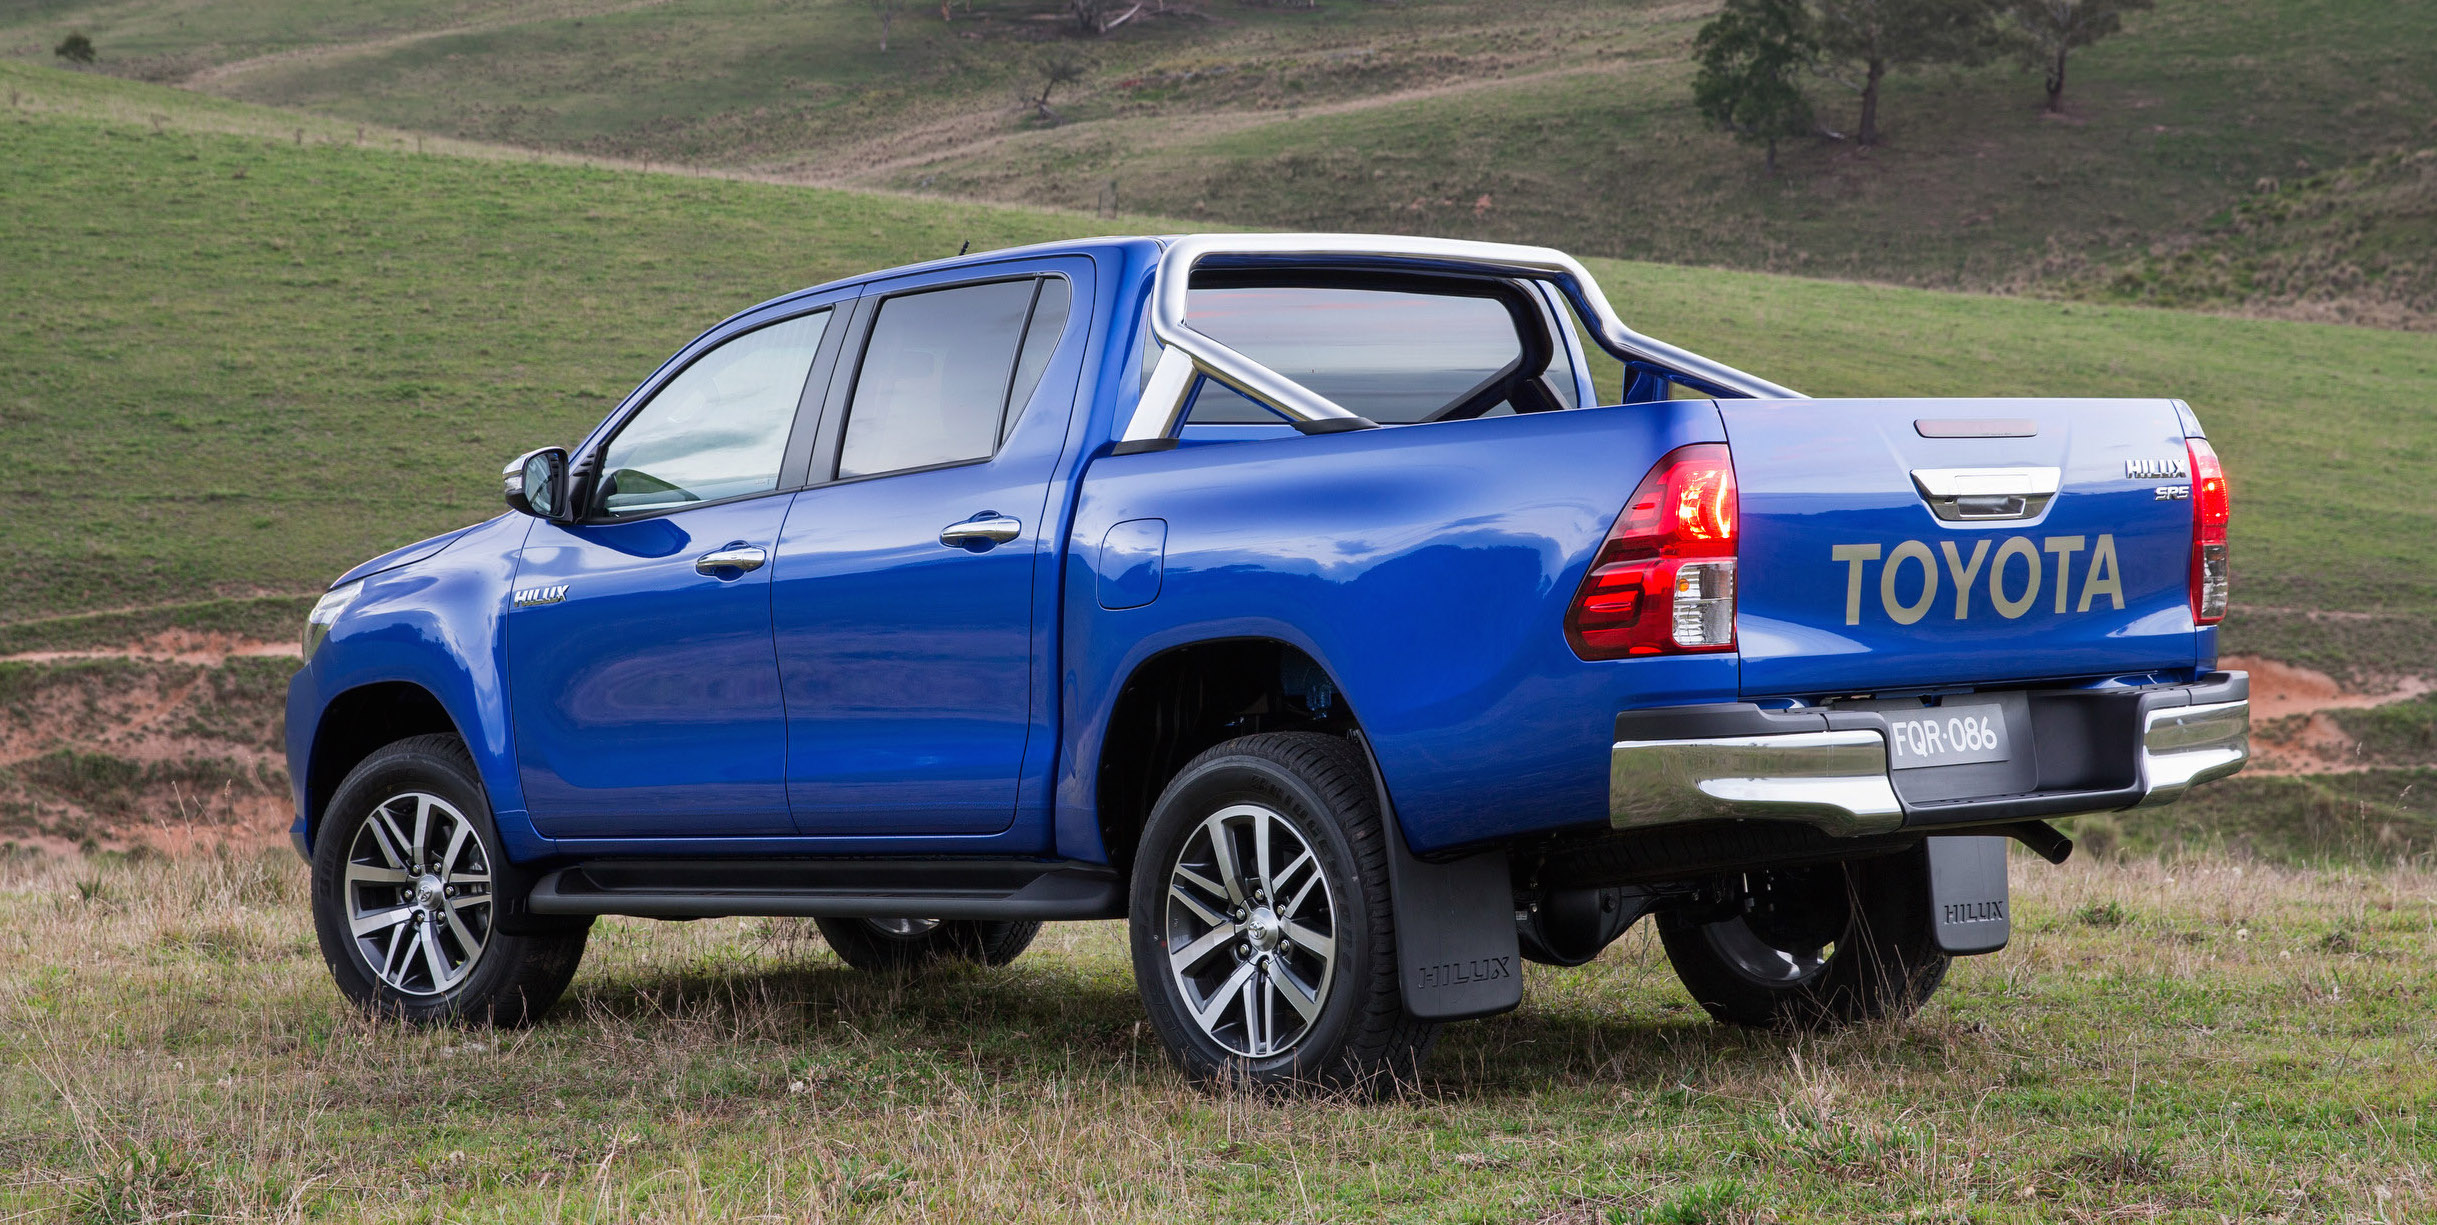 Comparison between ford ranger and toyota hilux #5